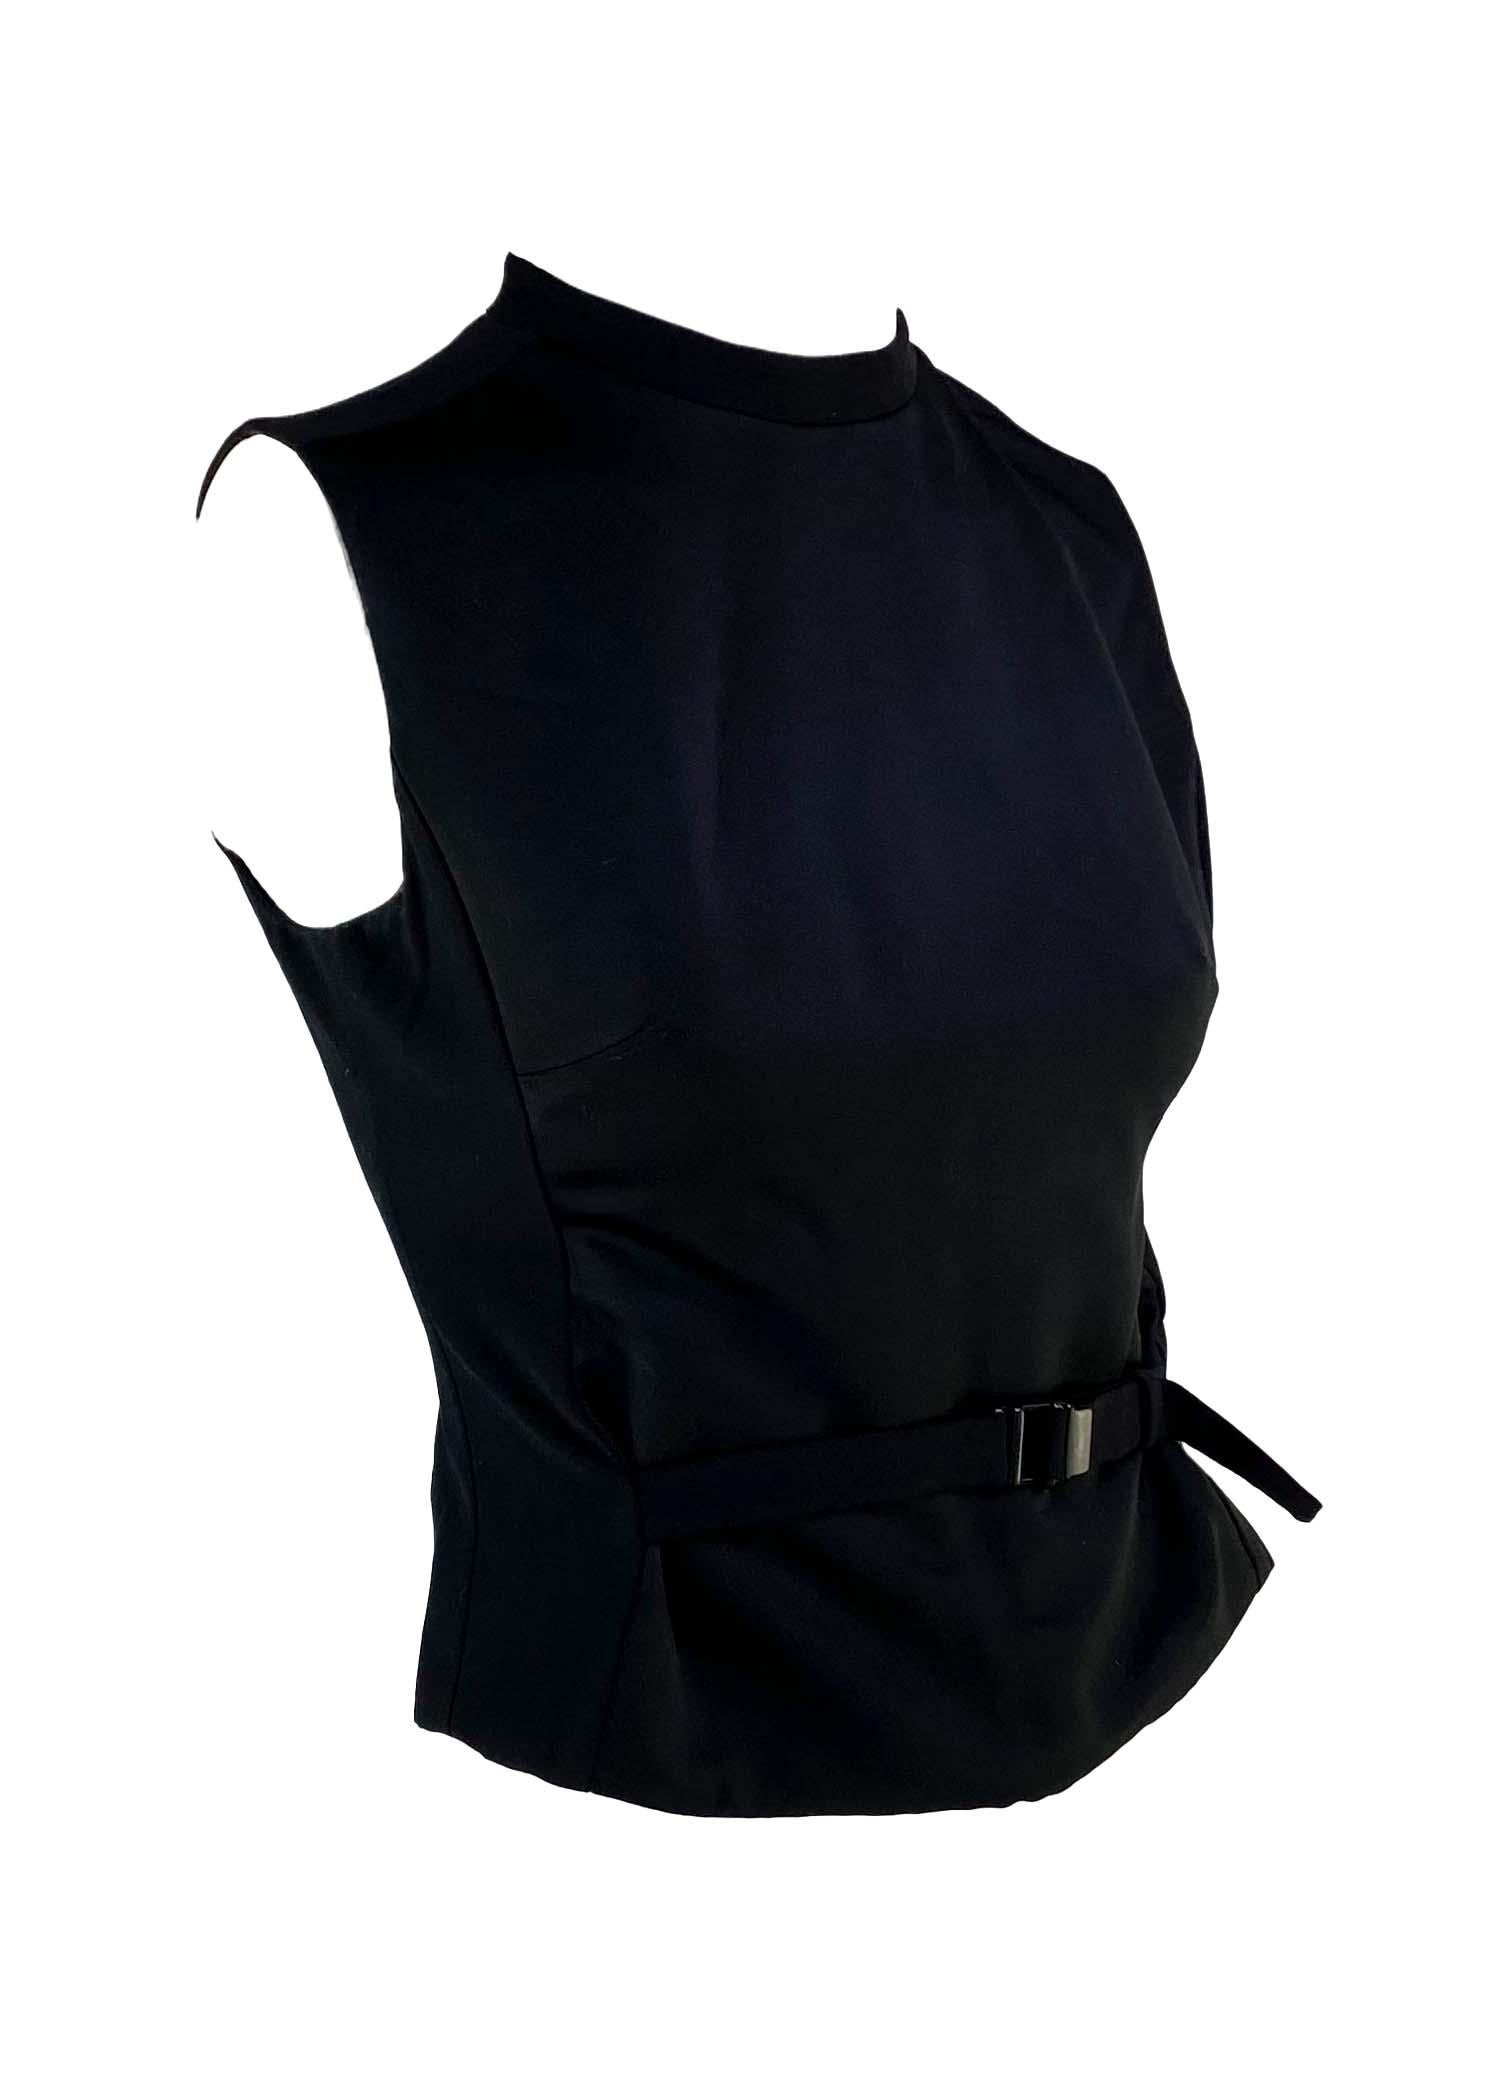 TheRealList presents: a sleek Tom Ford designed take on a Gucci sweater vest. The vest features a satin panel front with a buckle to help create a cinched waist and a zippered back. This top was created by Tom Ford for the Fall/Winter 1999